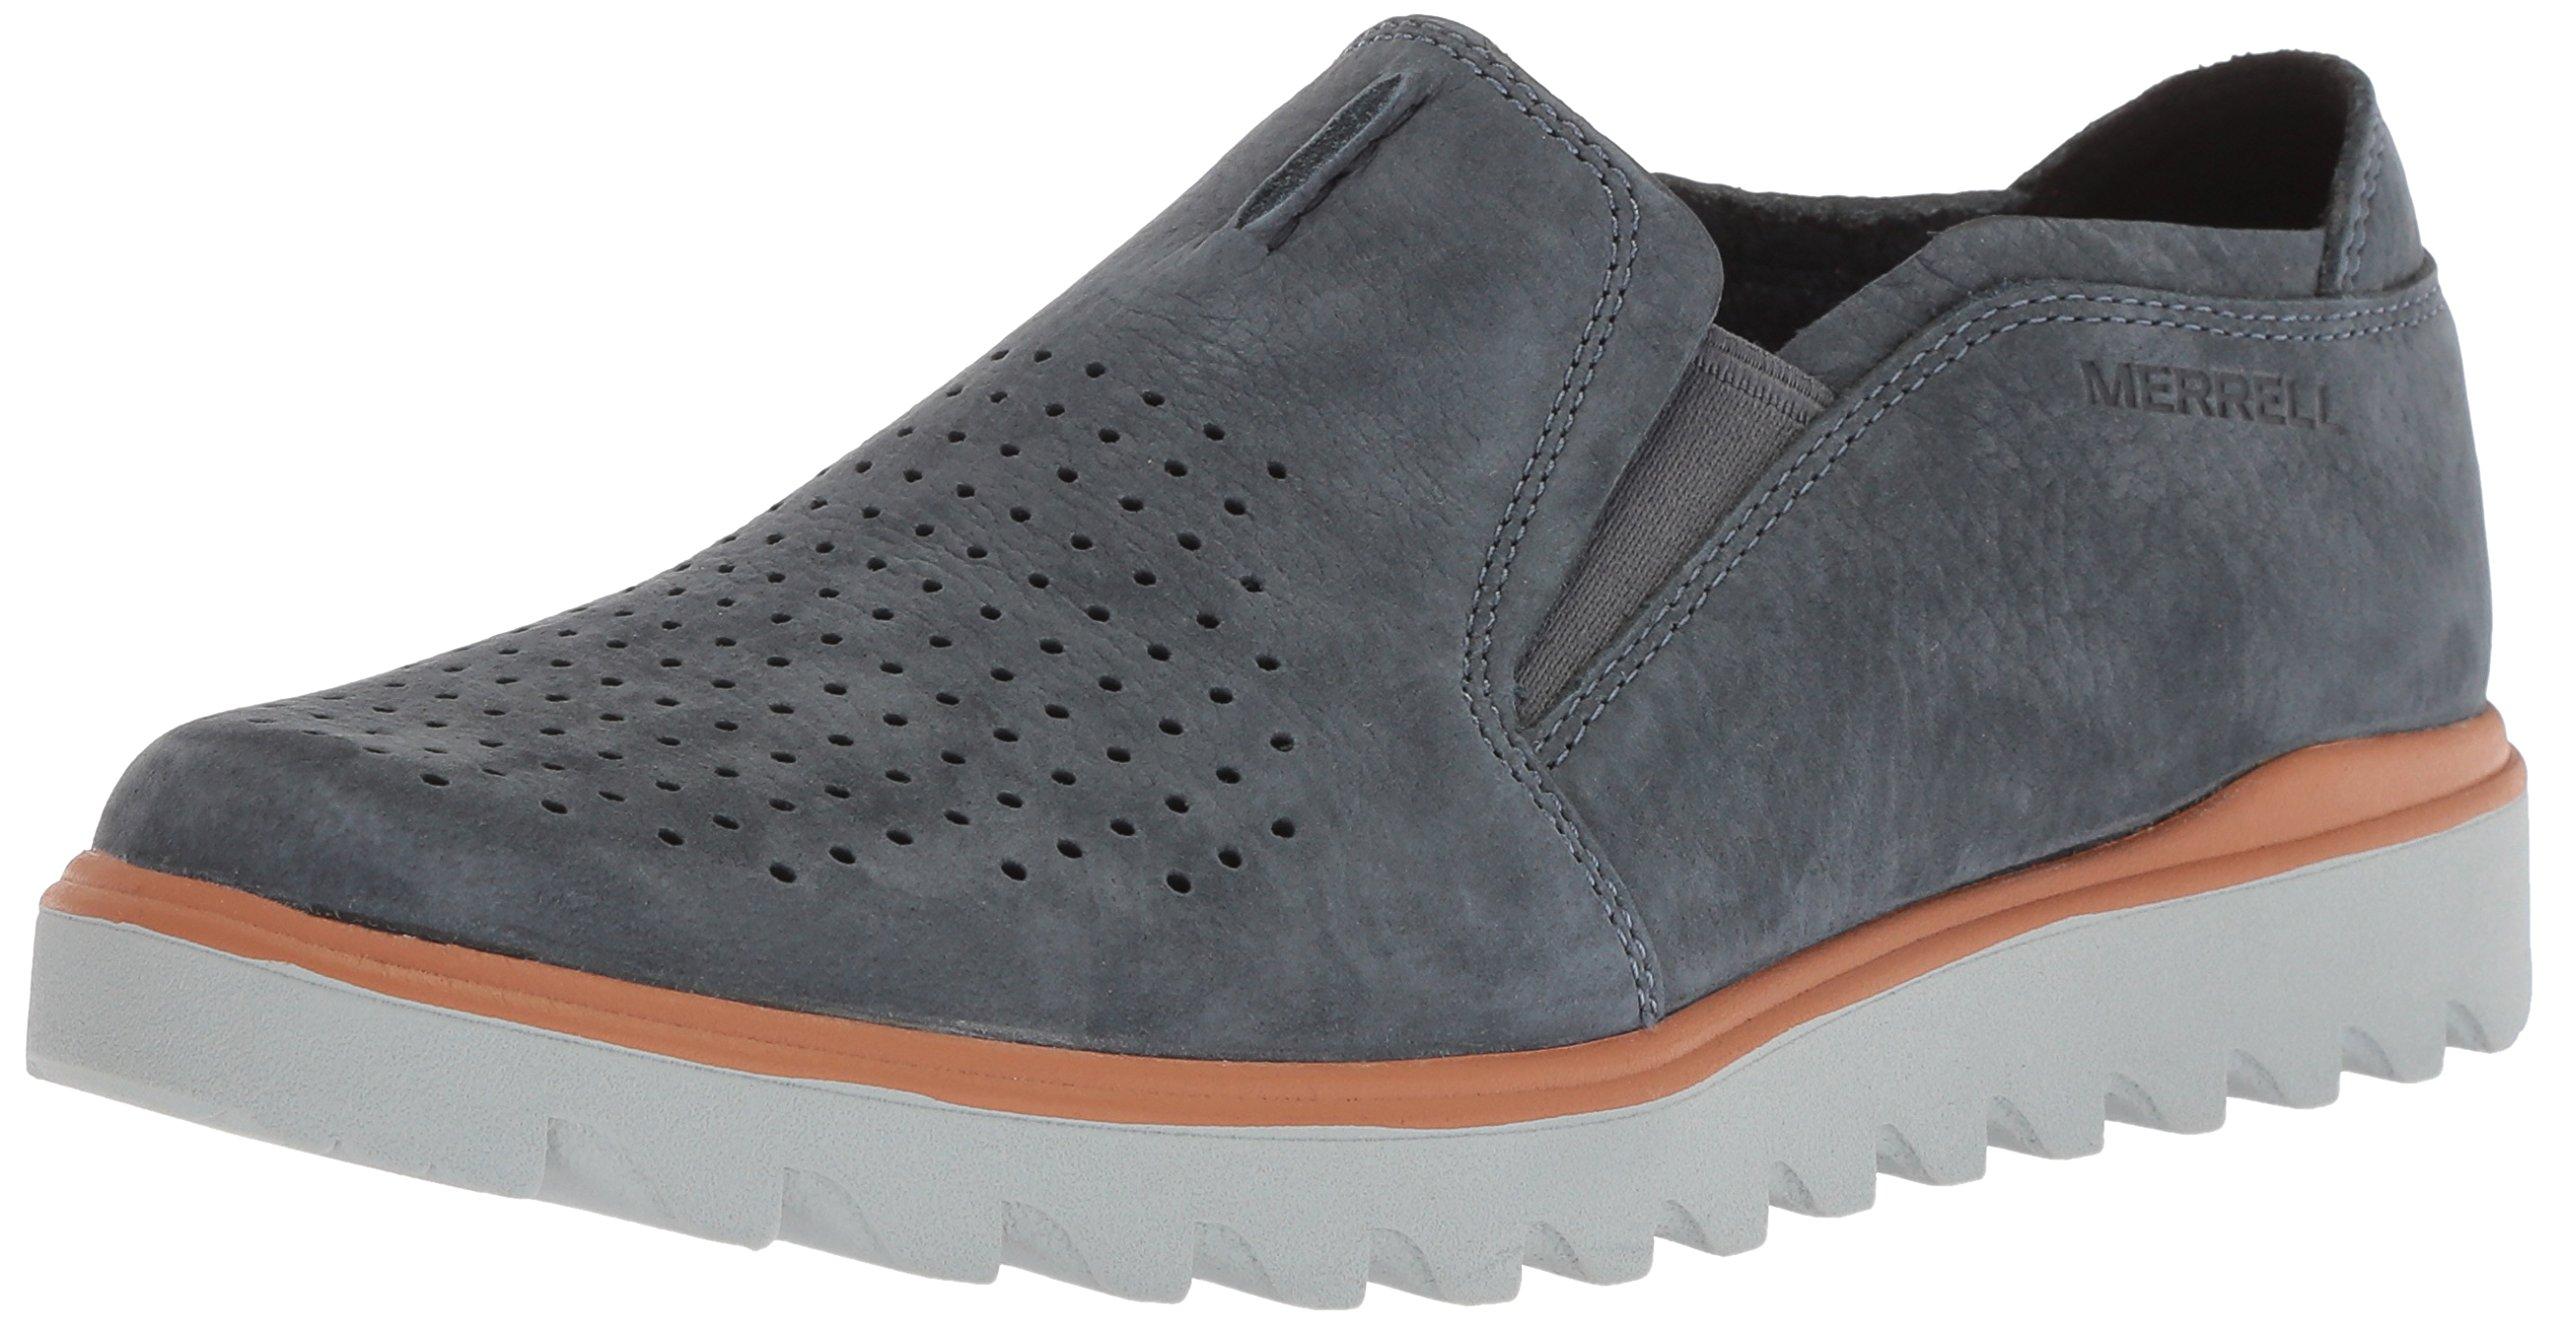 Merrell Leather Downtown Moc Sneaker in Slate (Blue) for Men - Save 1% ...